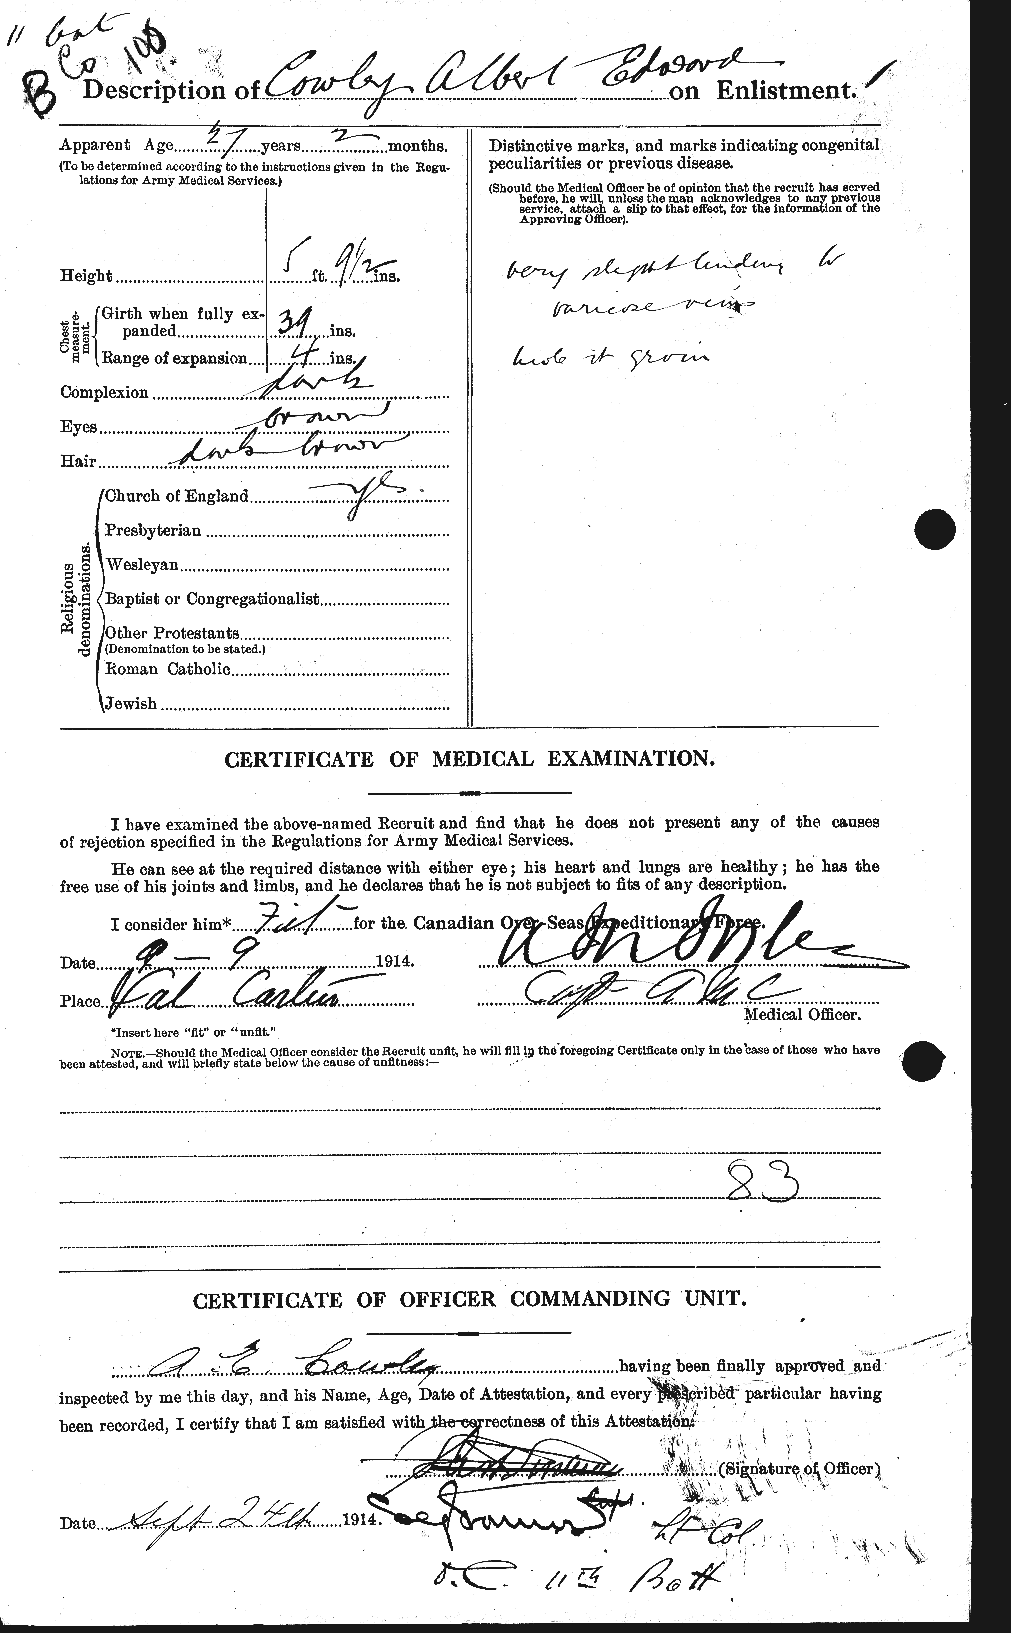 Personnel Records of the First World War - CEF 059827b